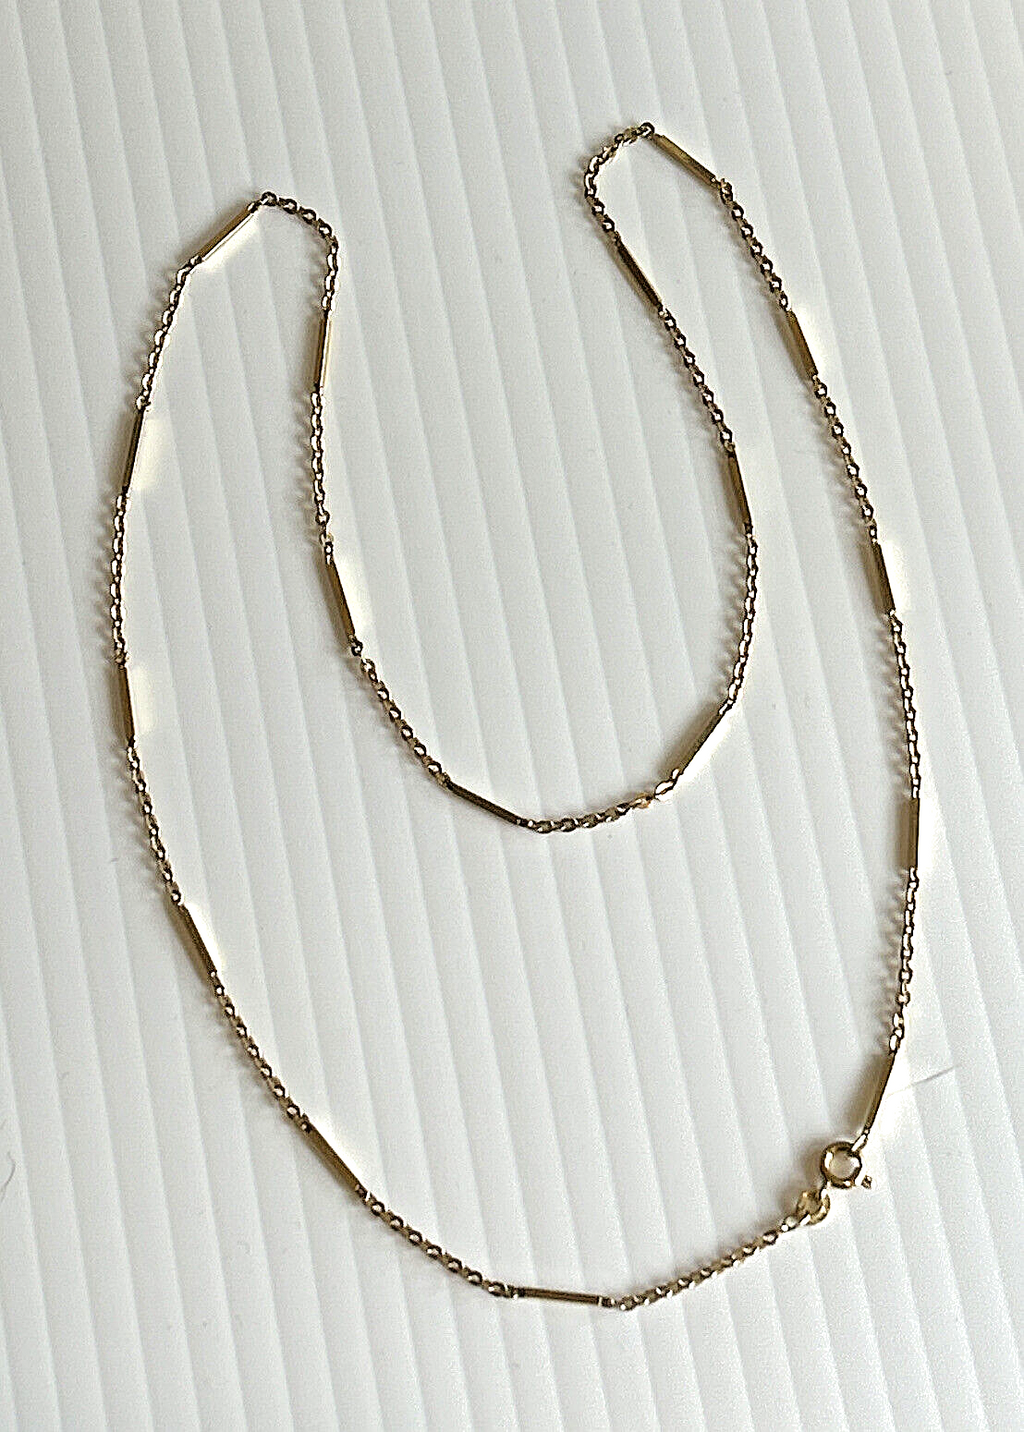 18k 750 Gold Italy UnoAErre Necklace / Chain - 24 Inch - 7.2 Grams